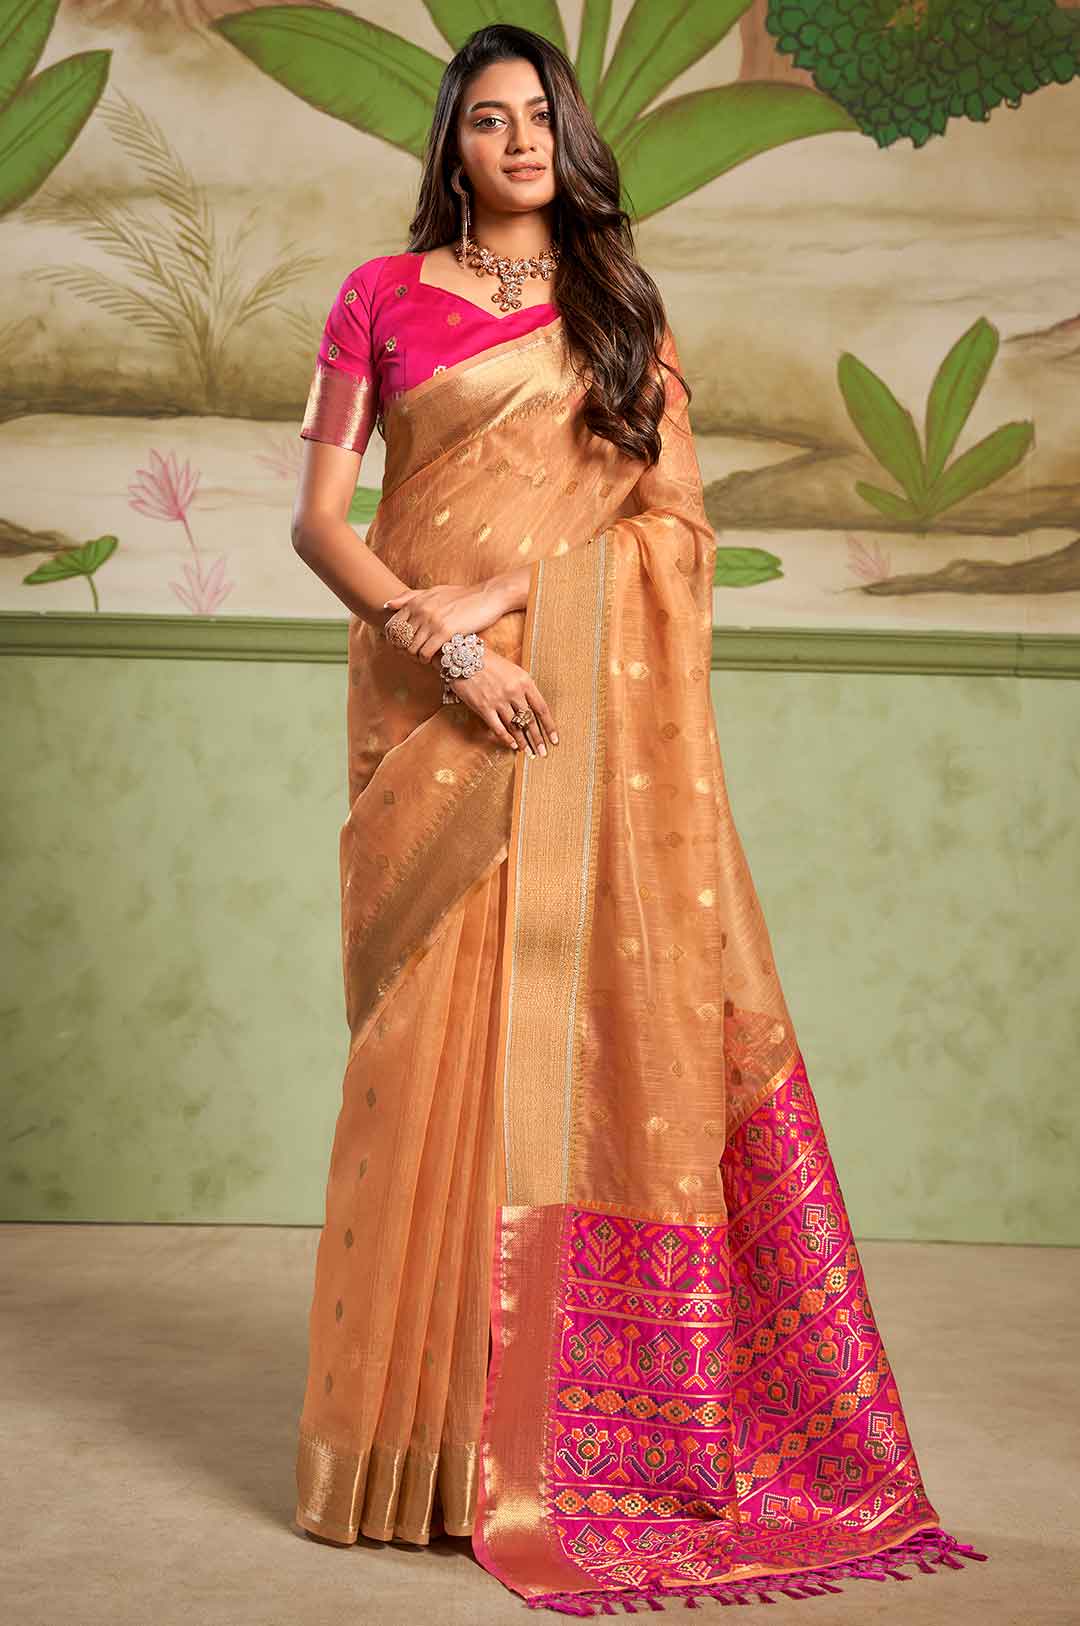 Woden and Pink Nude Cotton Silk Saree with Weave Border and Gold Zari Work